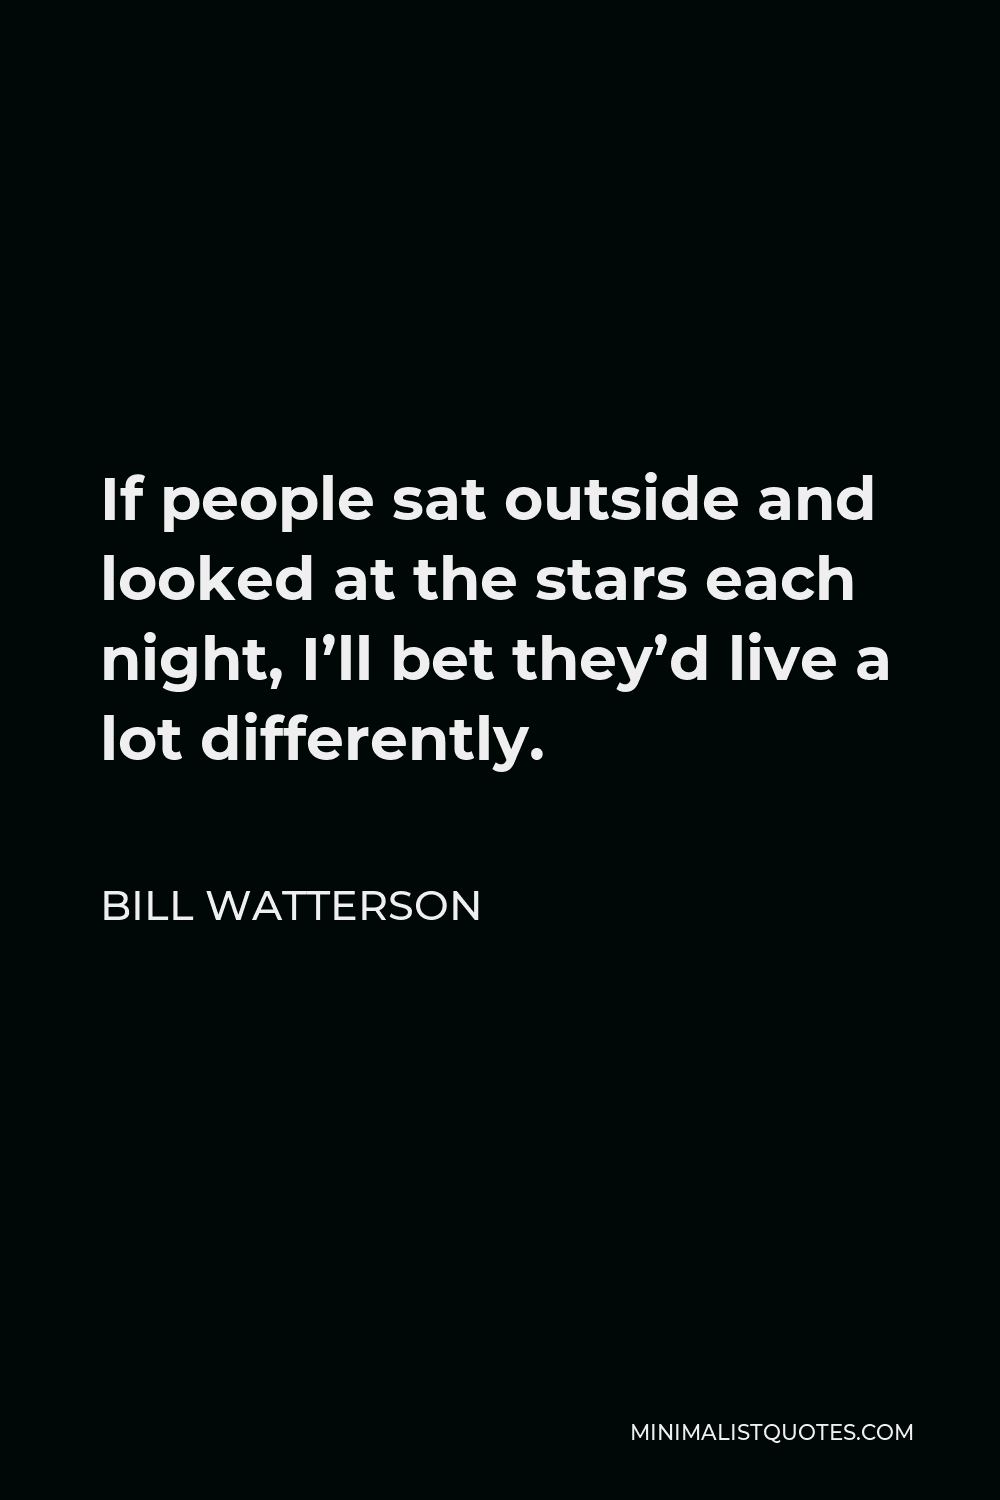 Bill Watterson Quote - If people sat outside and looked at the stars each night, I’ll bet they’d live a lot differently.